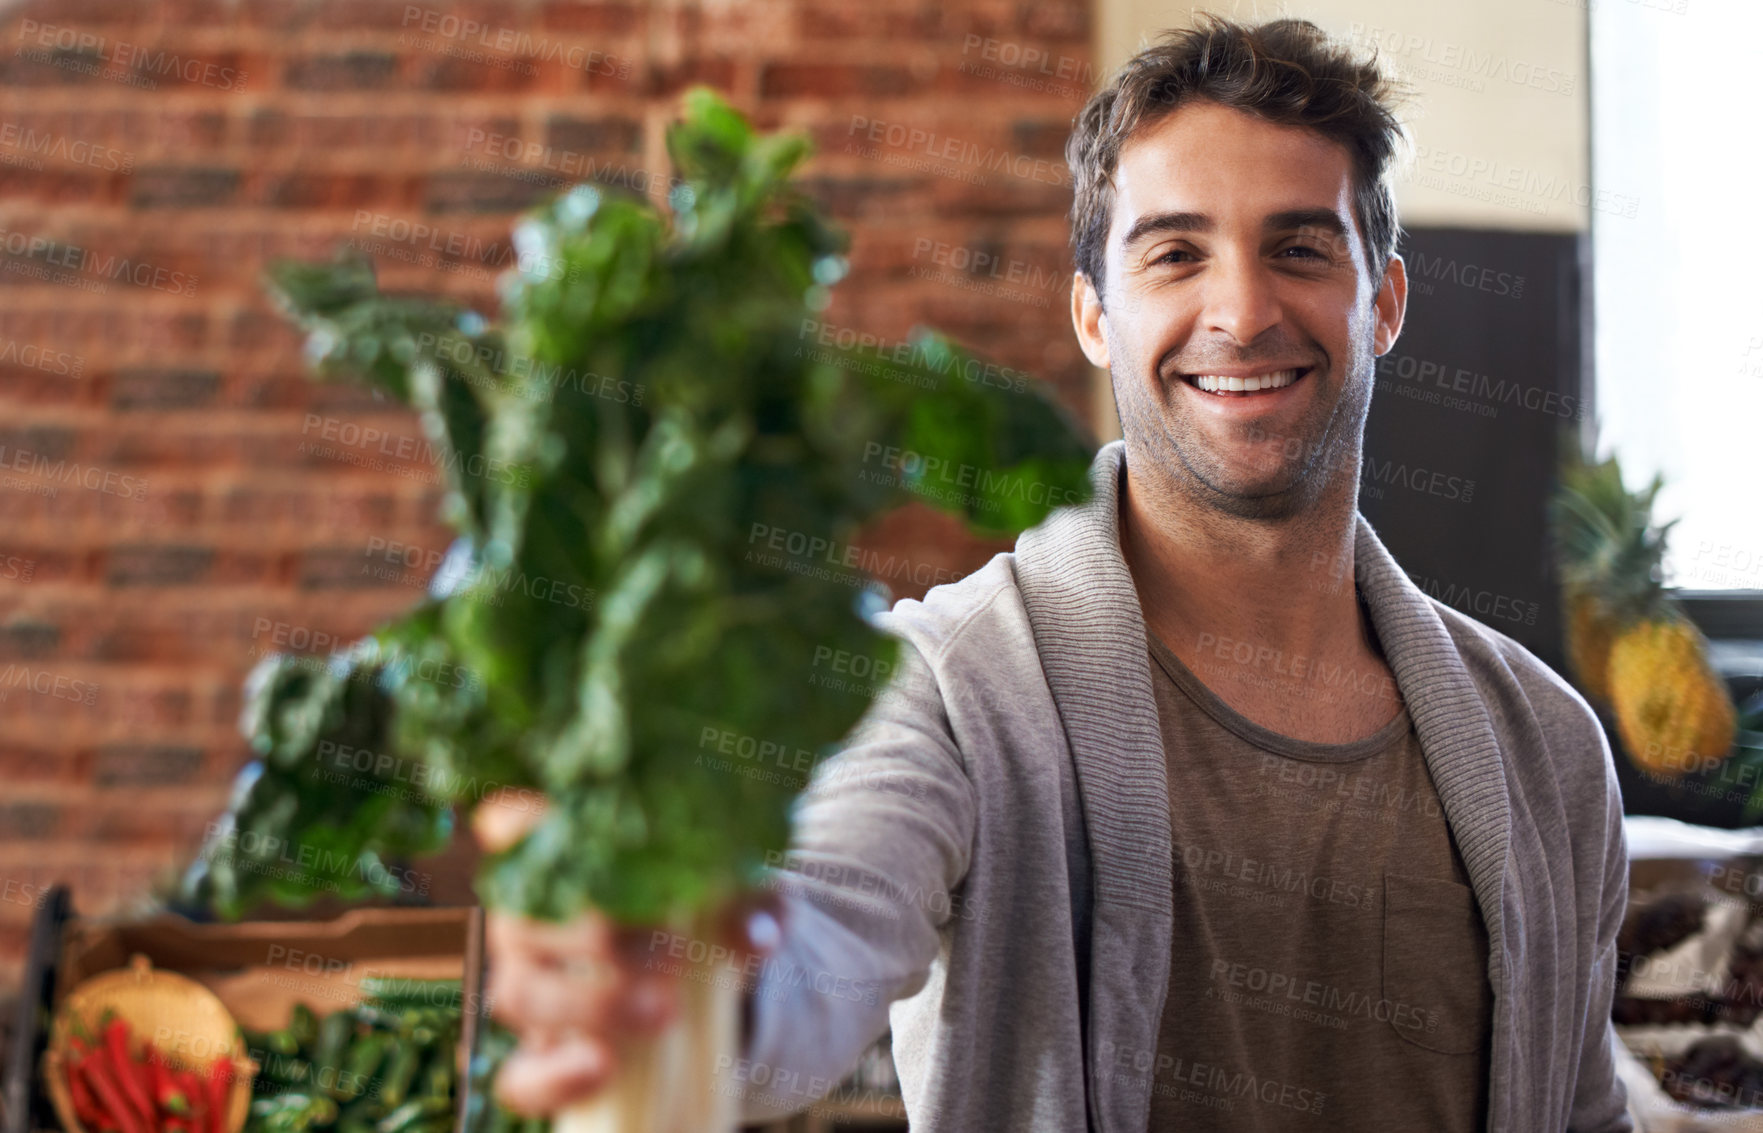 Buy stock photo Portrait of a young man in a grocery store holding up spinach to the camera